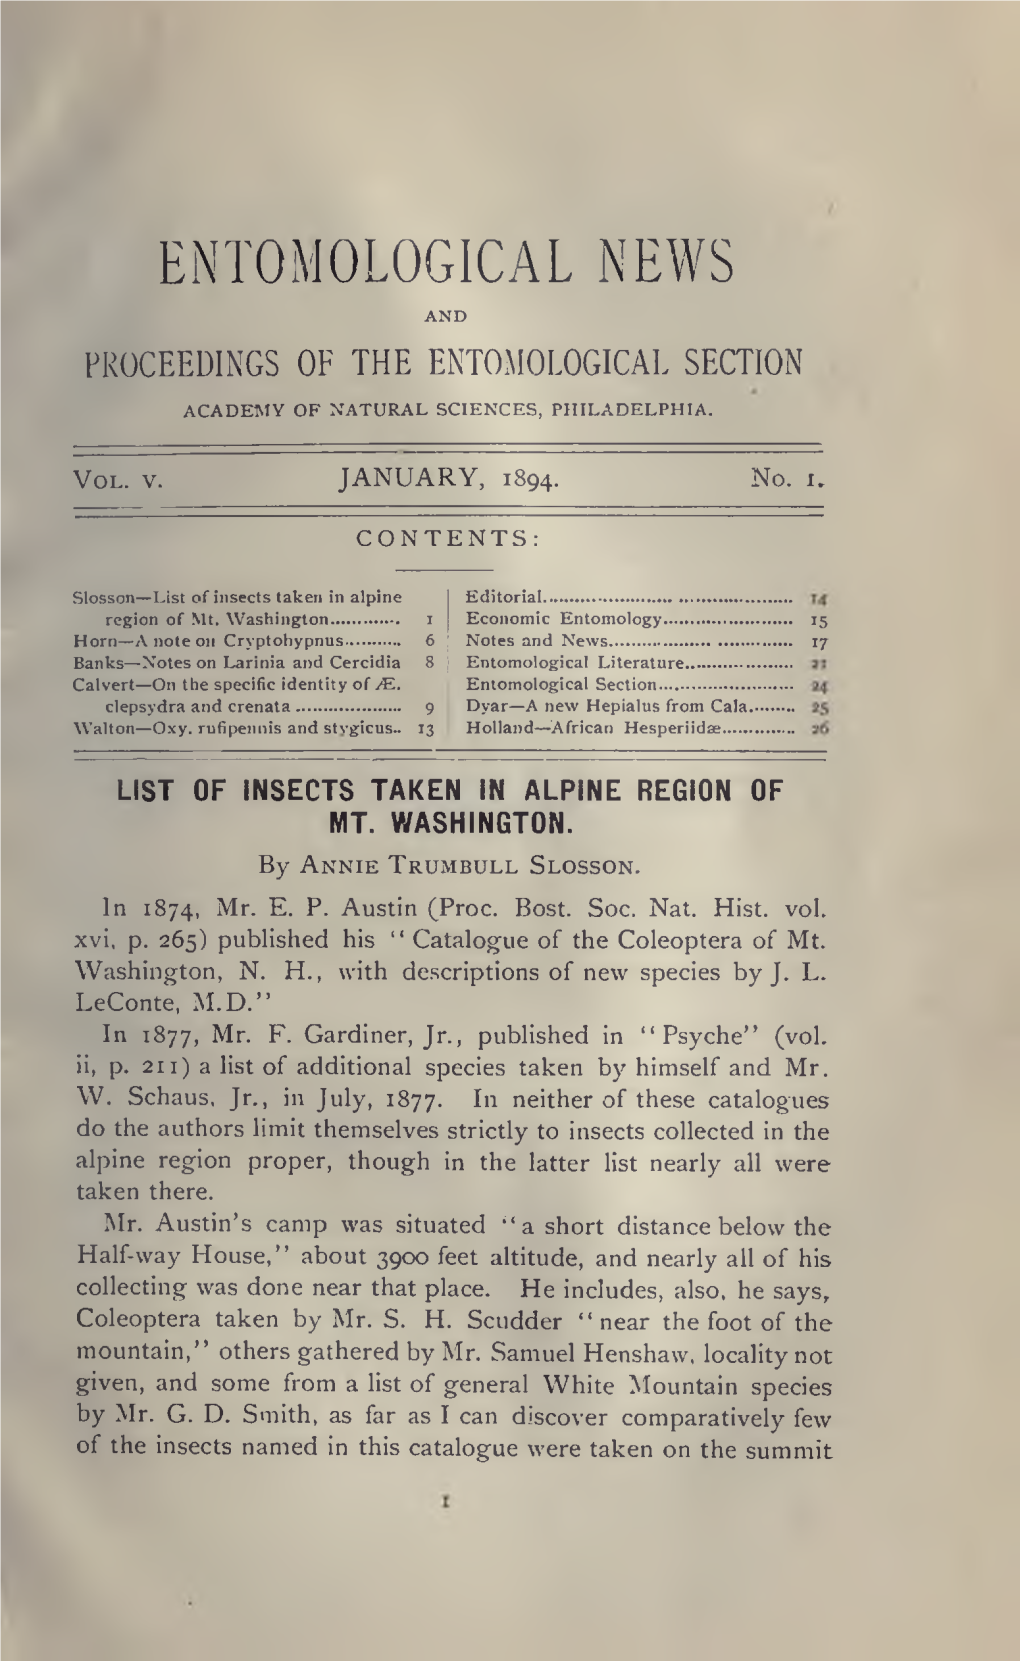 Entomological News and Proceedings of the Entomological Section